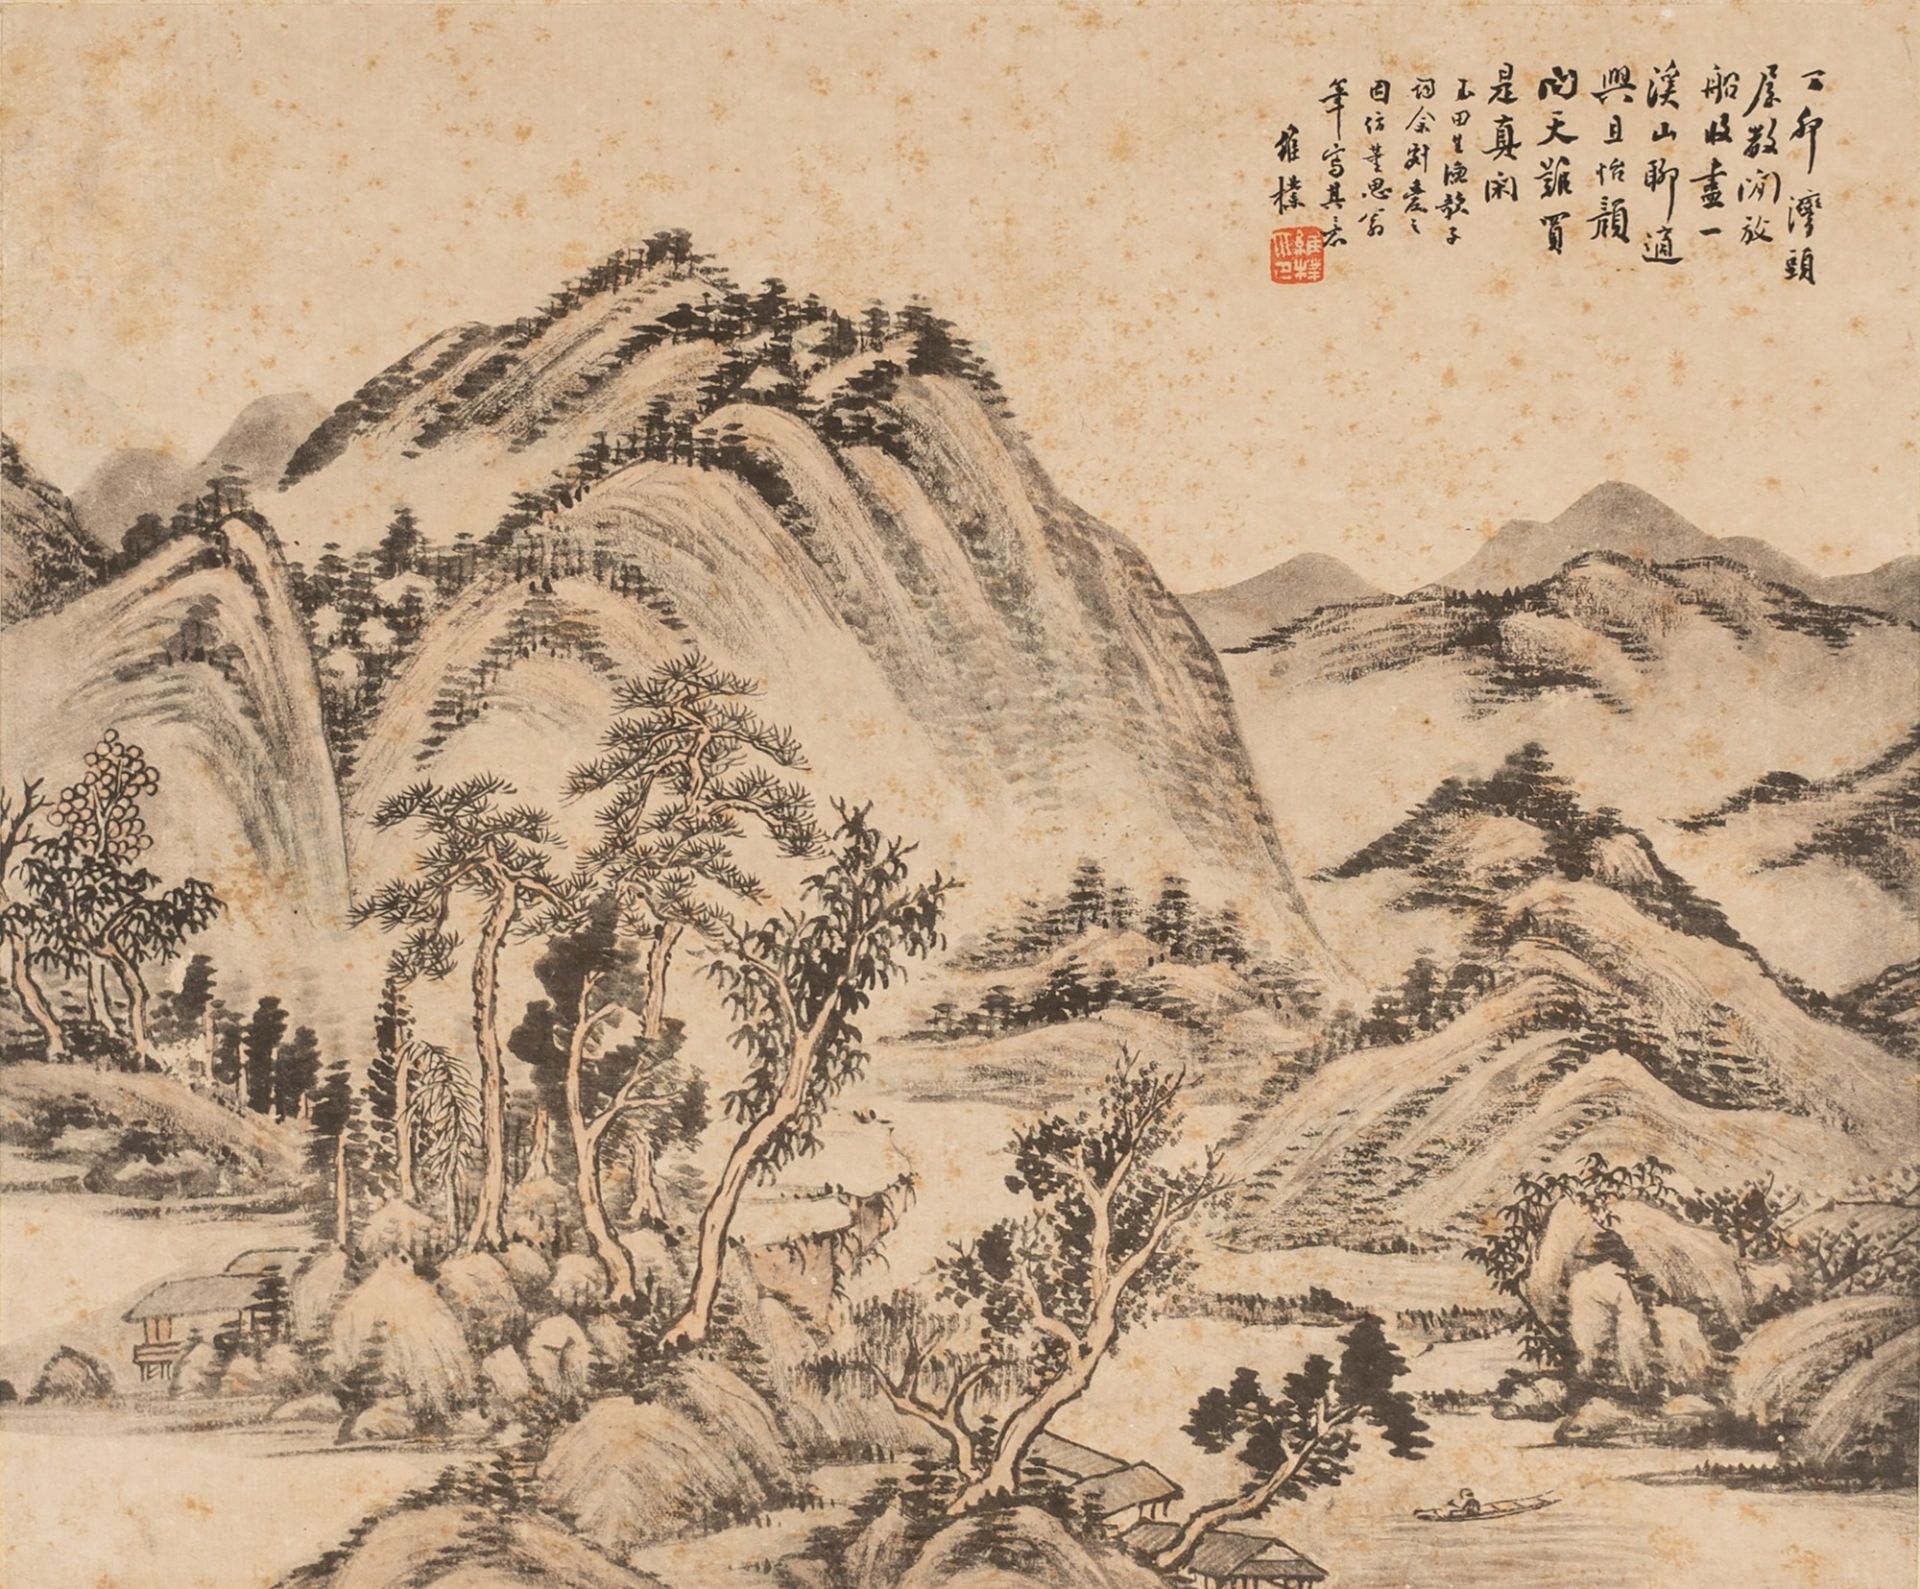 Two prints depicting landscapes, China, 18th century